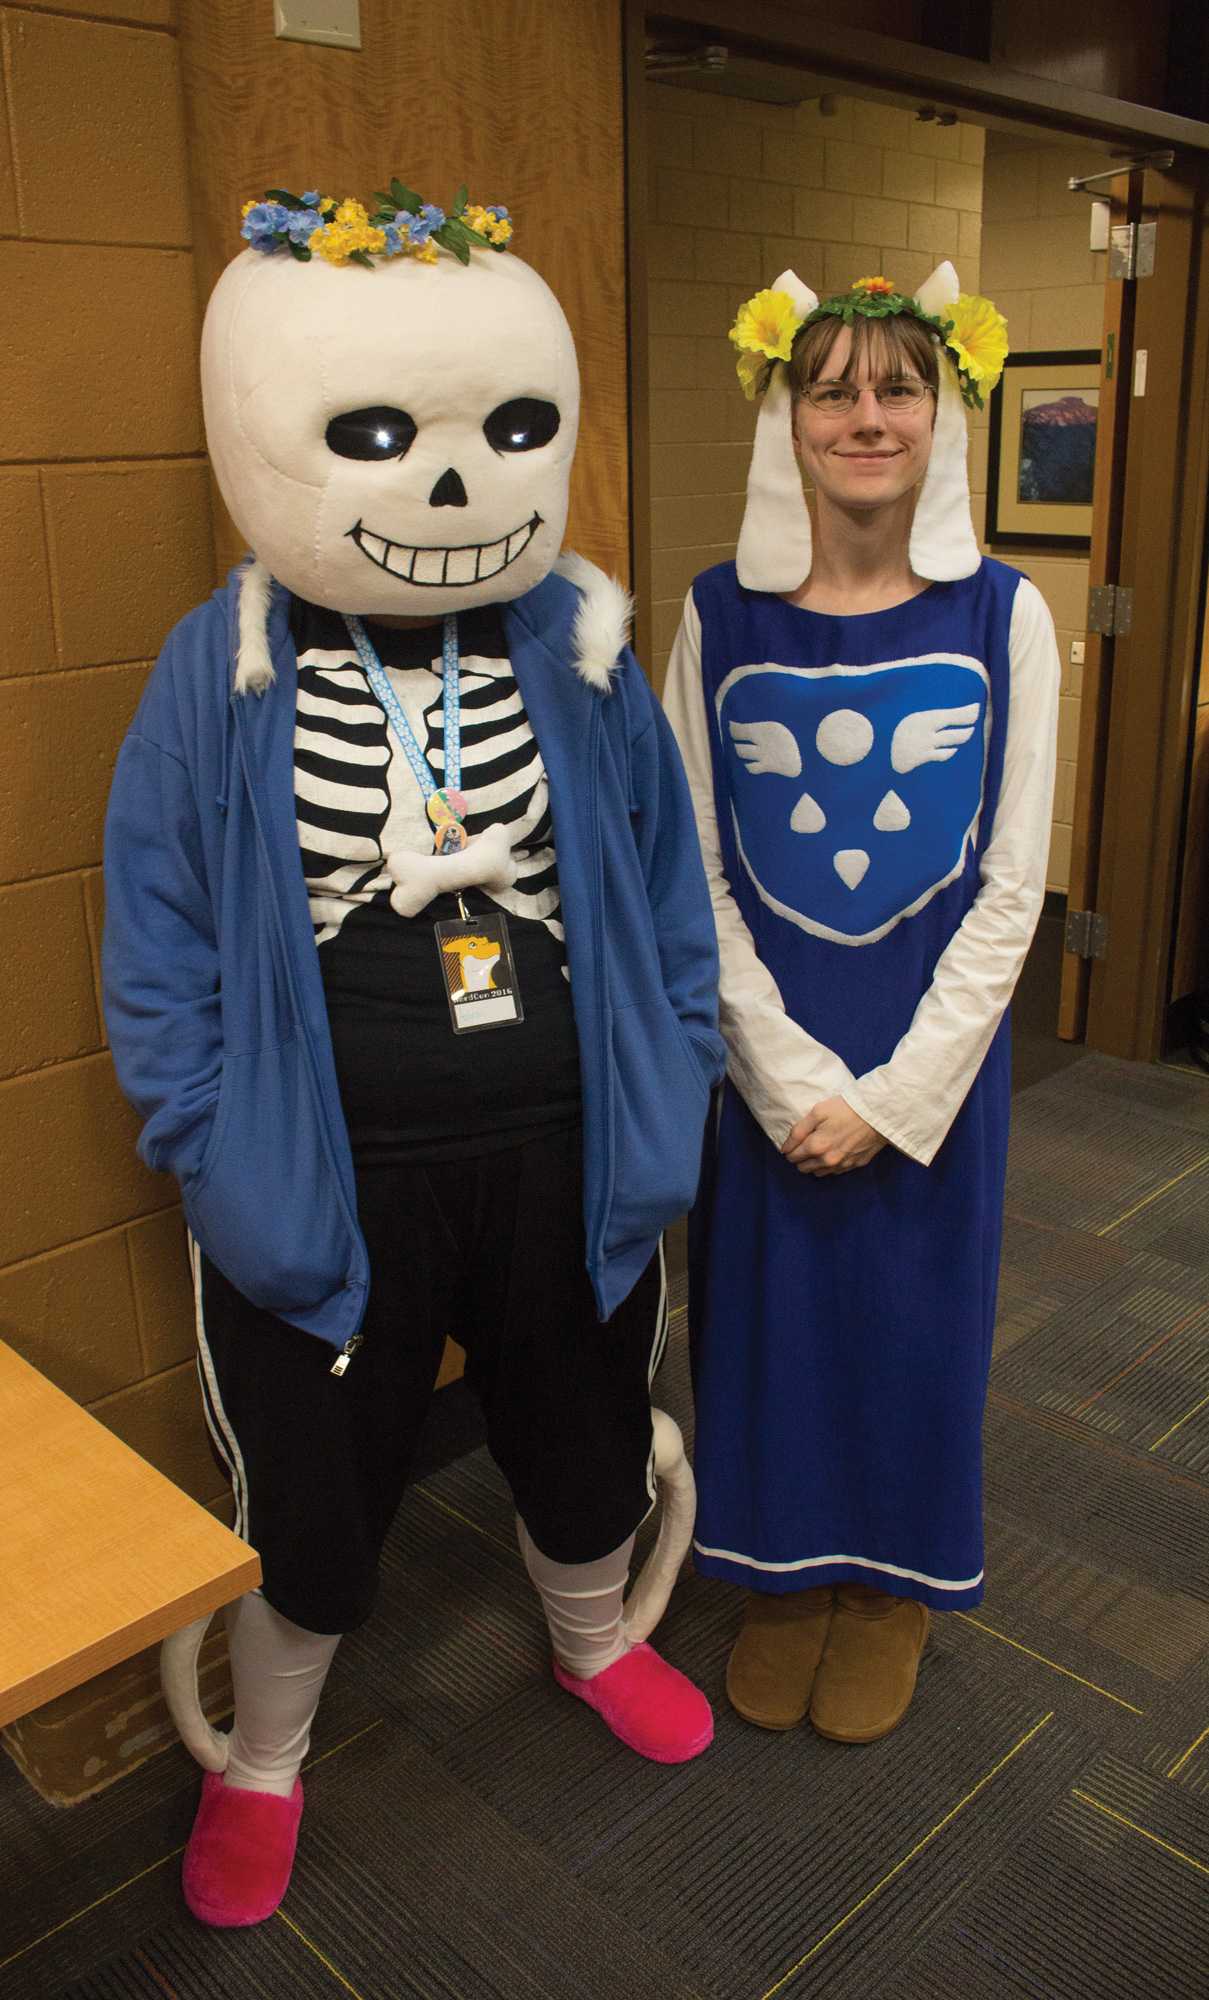 Ashton LeBlanc and Sarah Taylor cosplay at NerdCon. The event was held on Saturday, April 23 from 10:00 a.m. to 9:00 p.m. in Plemmons Student Union. Photo by Aaron Moran.